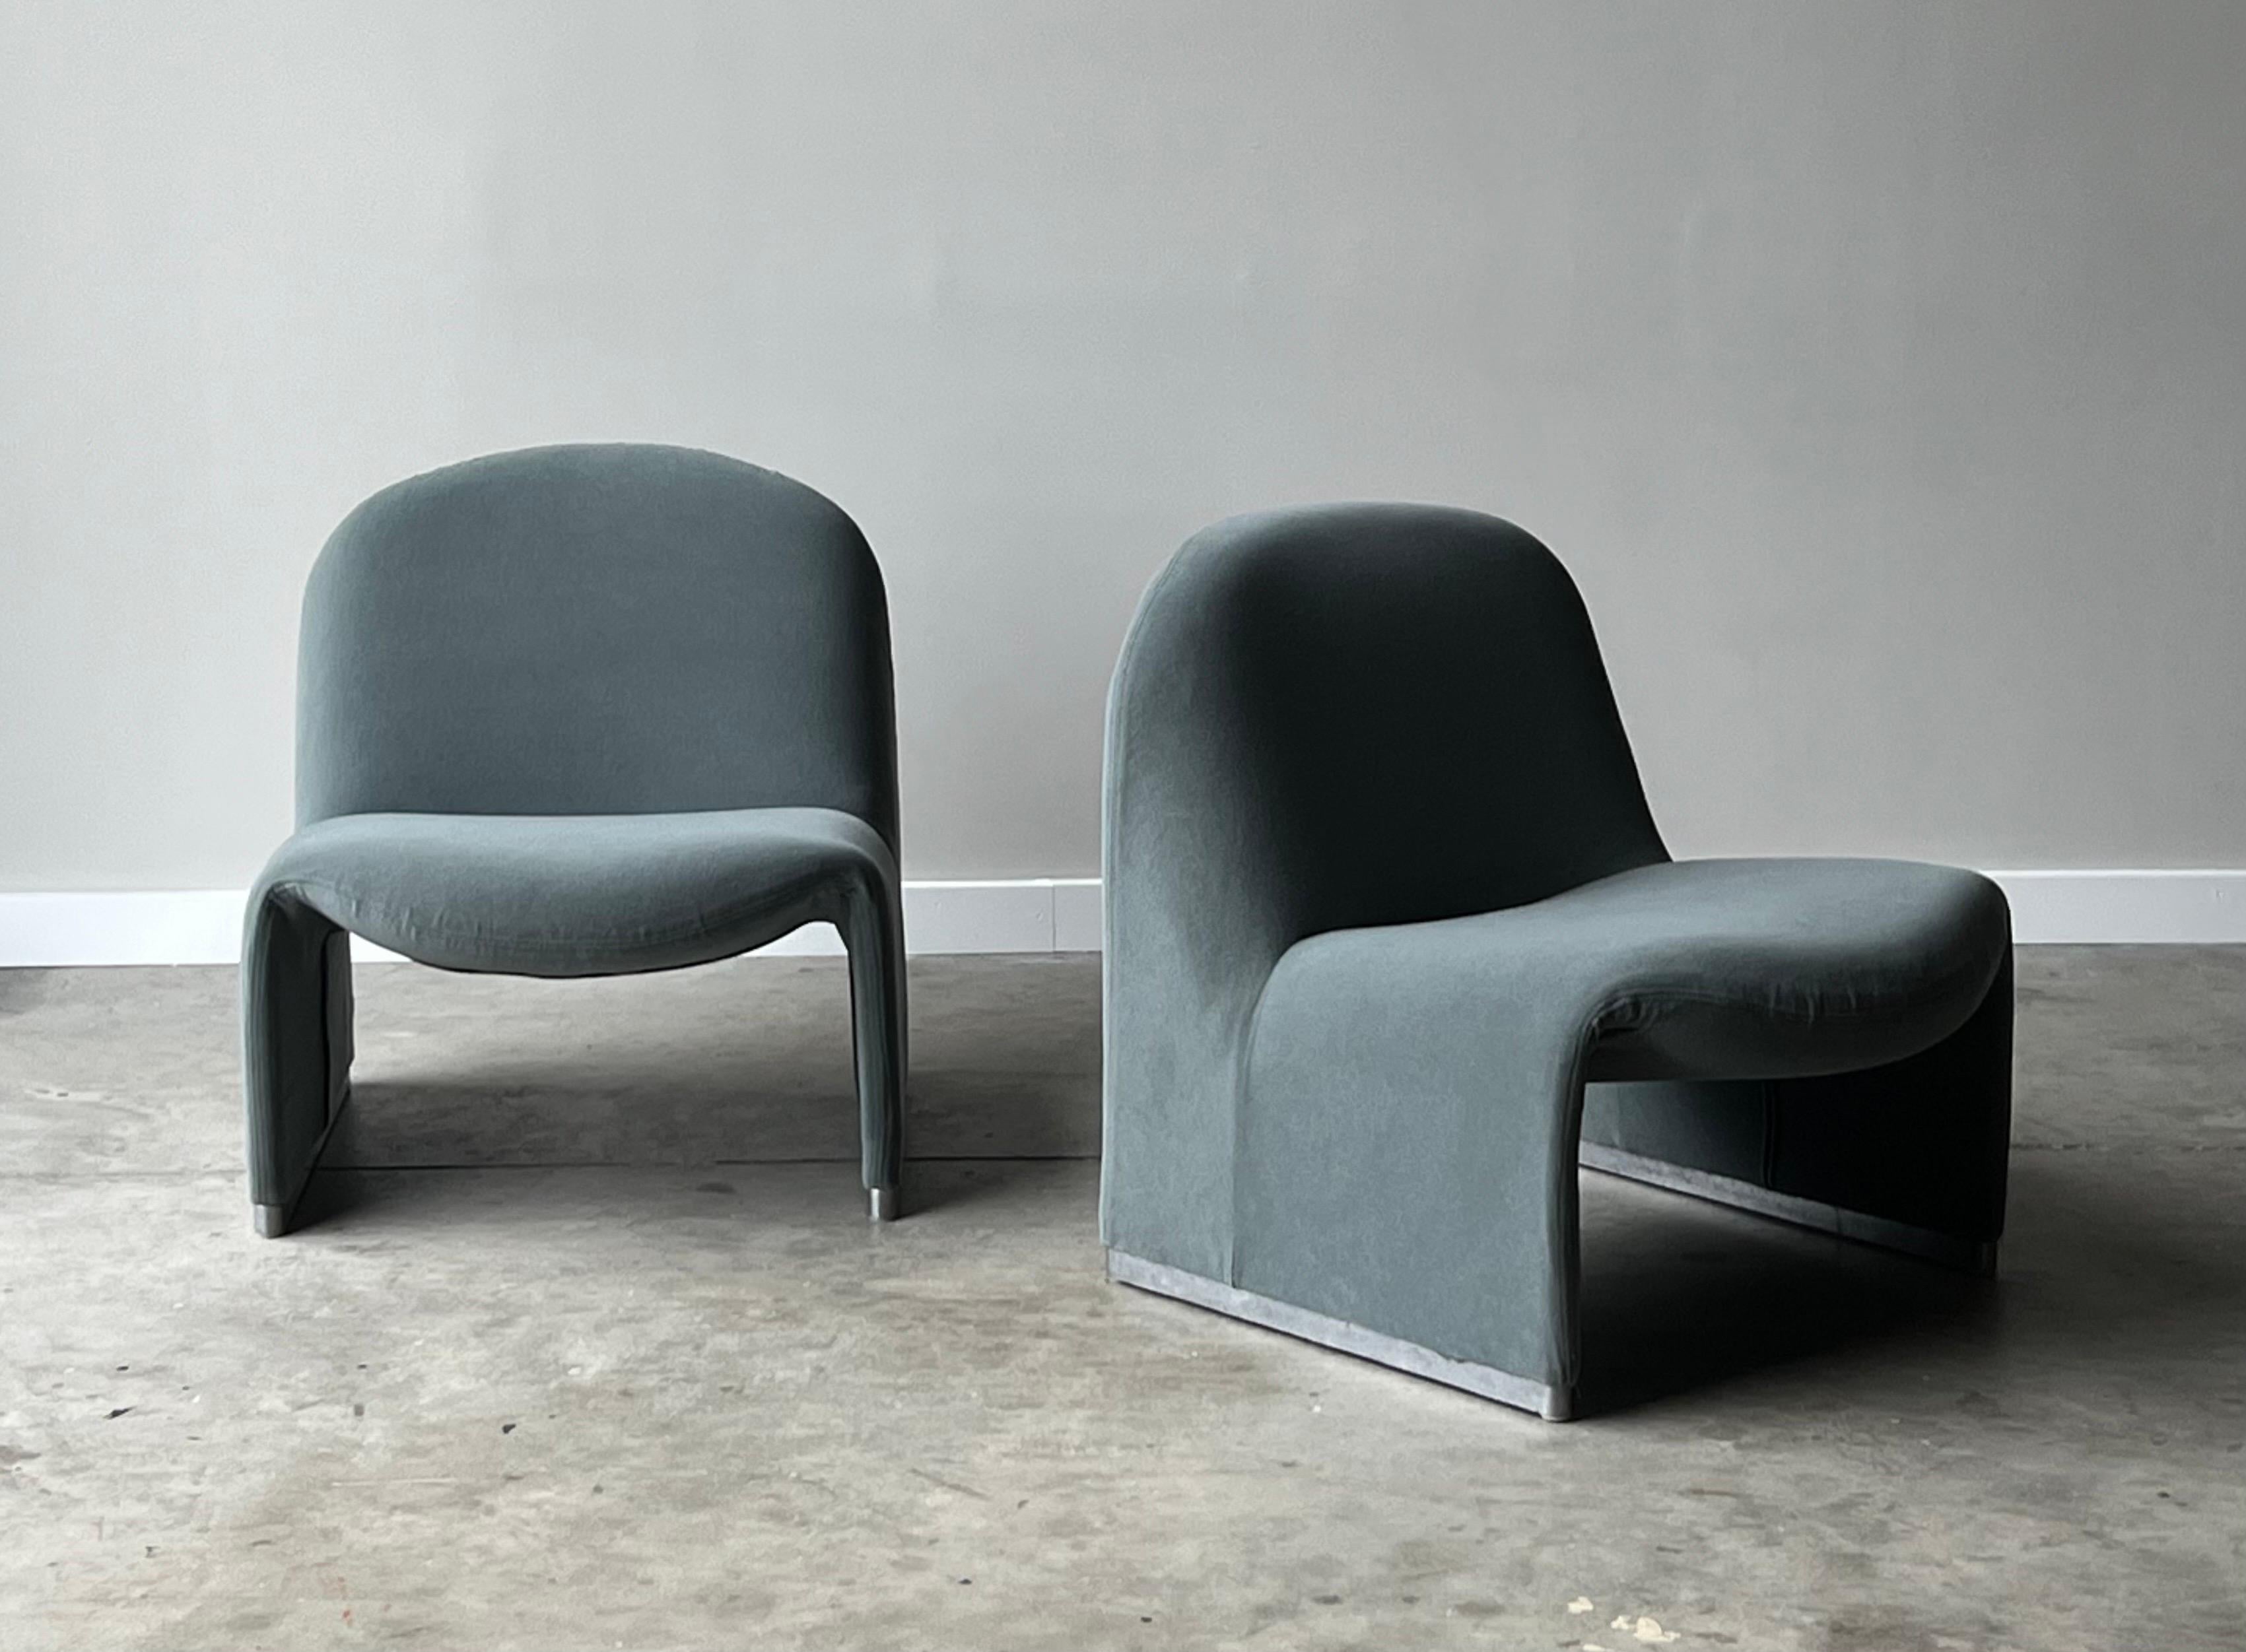 A beautiful pair of iconic 'Alky' lounges designed by Giancarlo Piretti for Anonima Castelli. Produced in the late 1970s, Italy. Iconic Italian design and so damn comfy. Newly reupholstered in a soft light dusty sea foam mohair fabric. In great